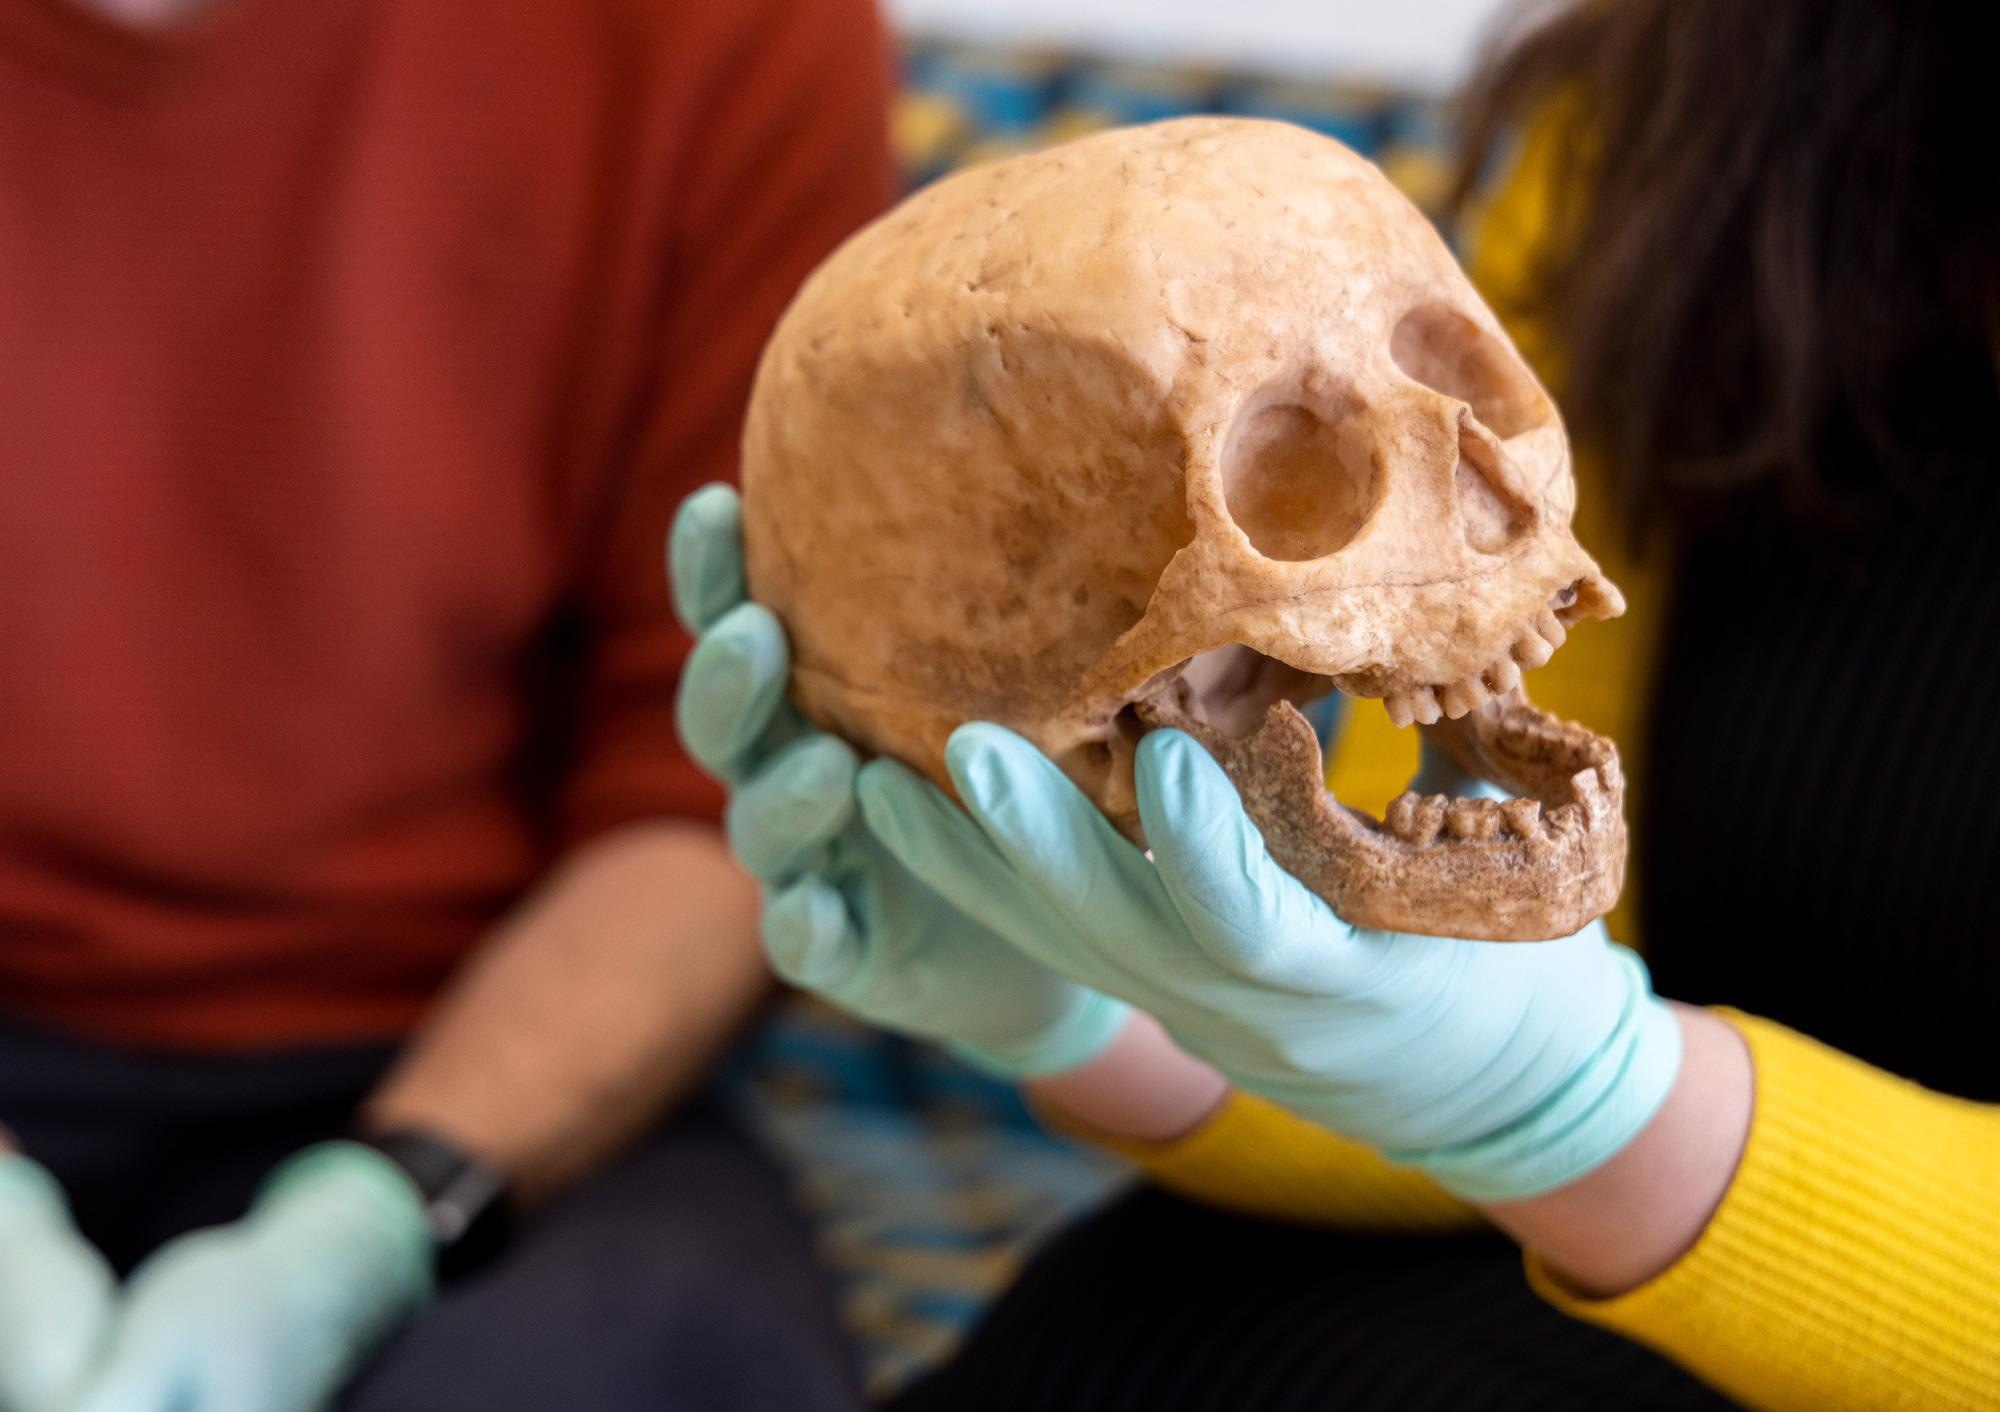 Vienna researchers aim to solve a great mystery of human evolution